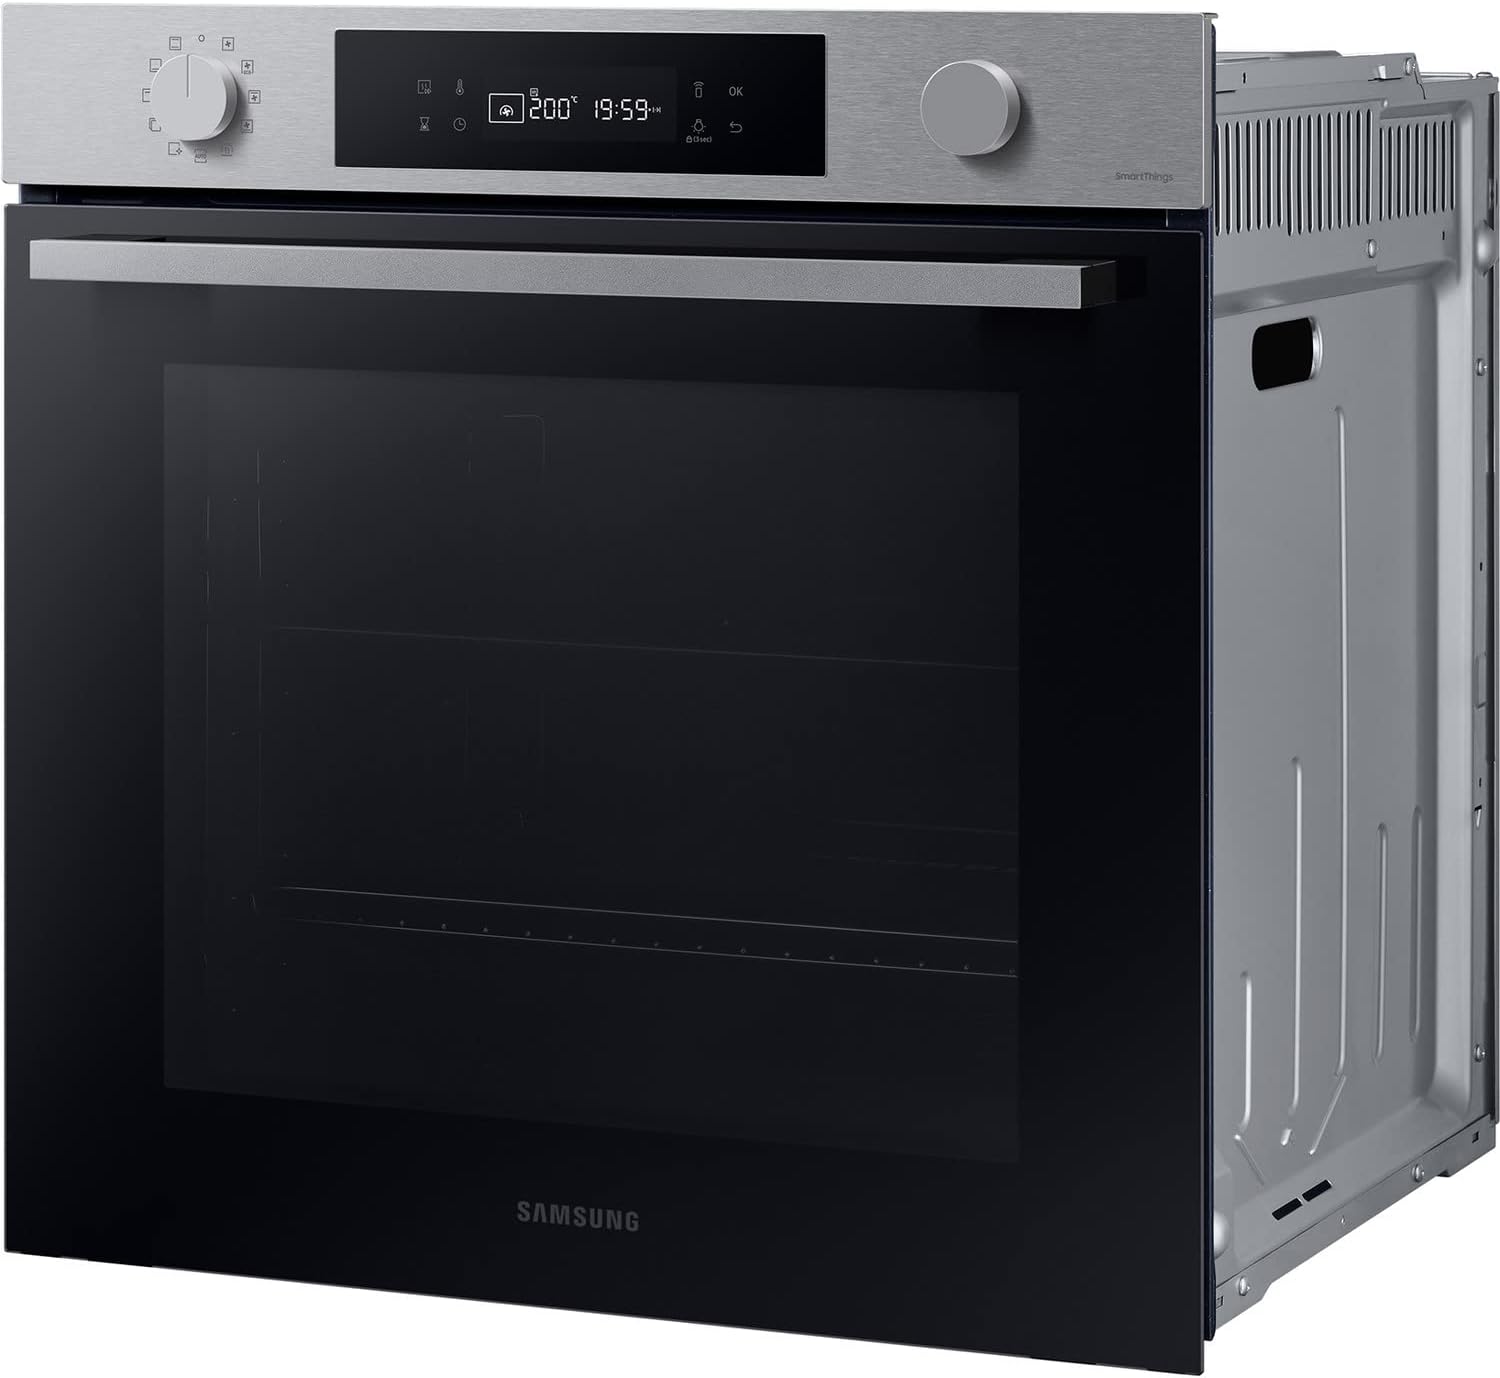 Series 4 Electric Self Cleaning Single Oven - Stainless Steel - Amazing Gadgets Outlet